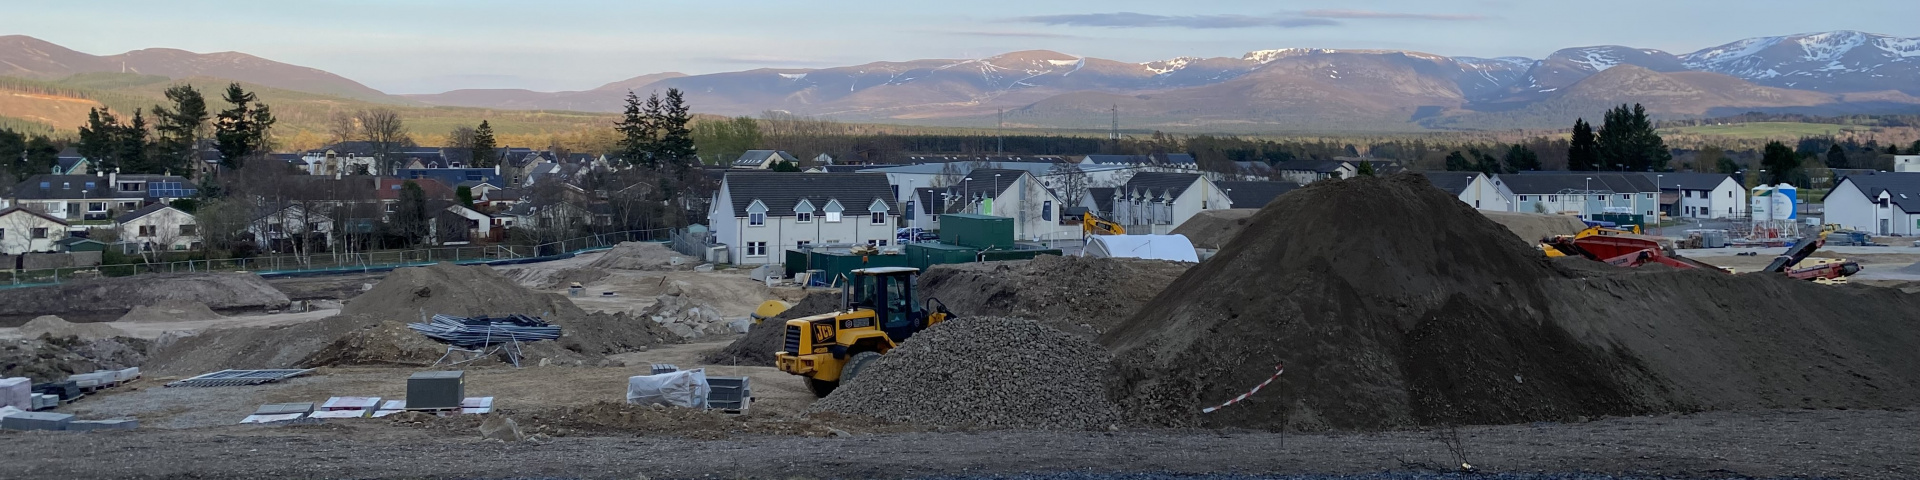 A new housing development being built. Image © Tom Manley.